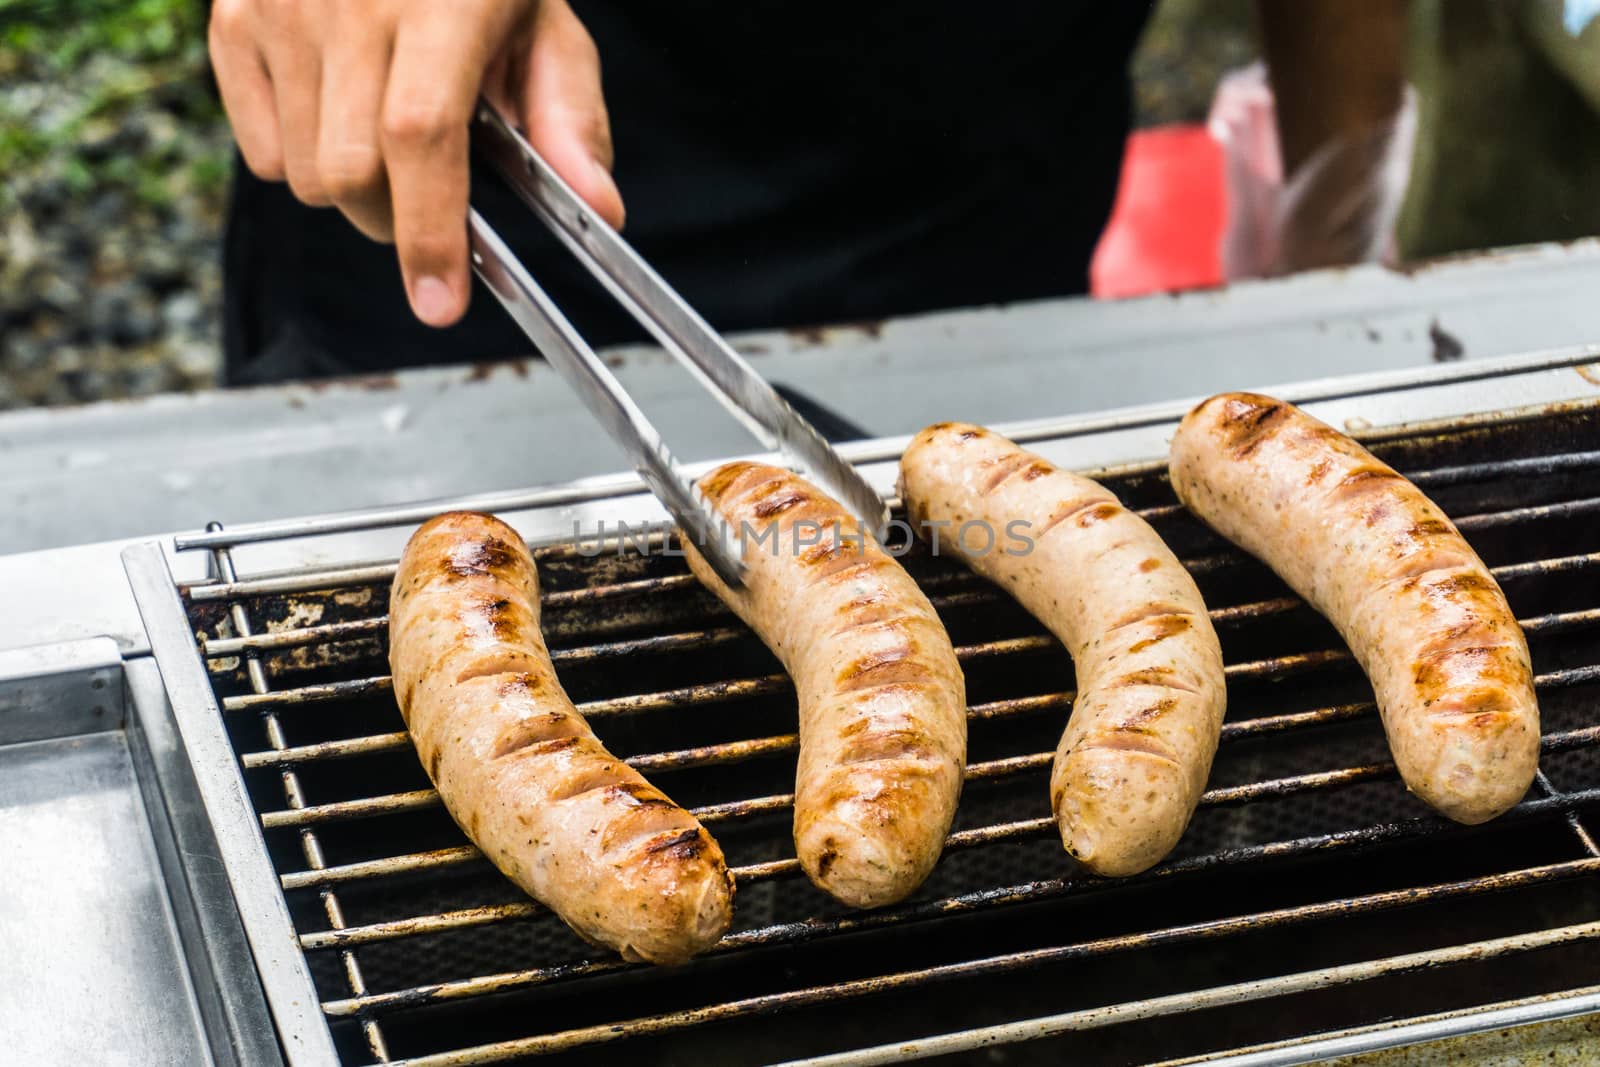 Fresh sausage and hot dogs grilling outdoors on a gas barbecue g by nopparats